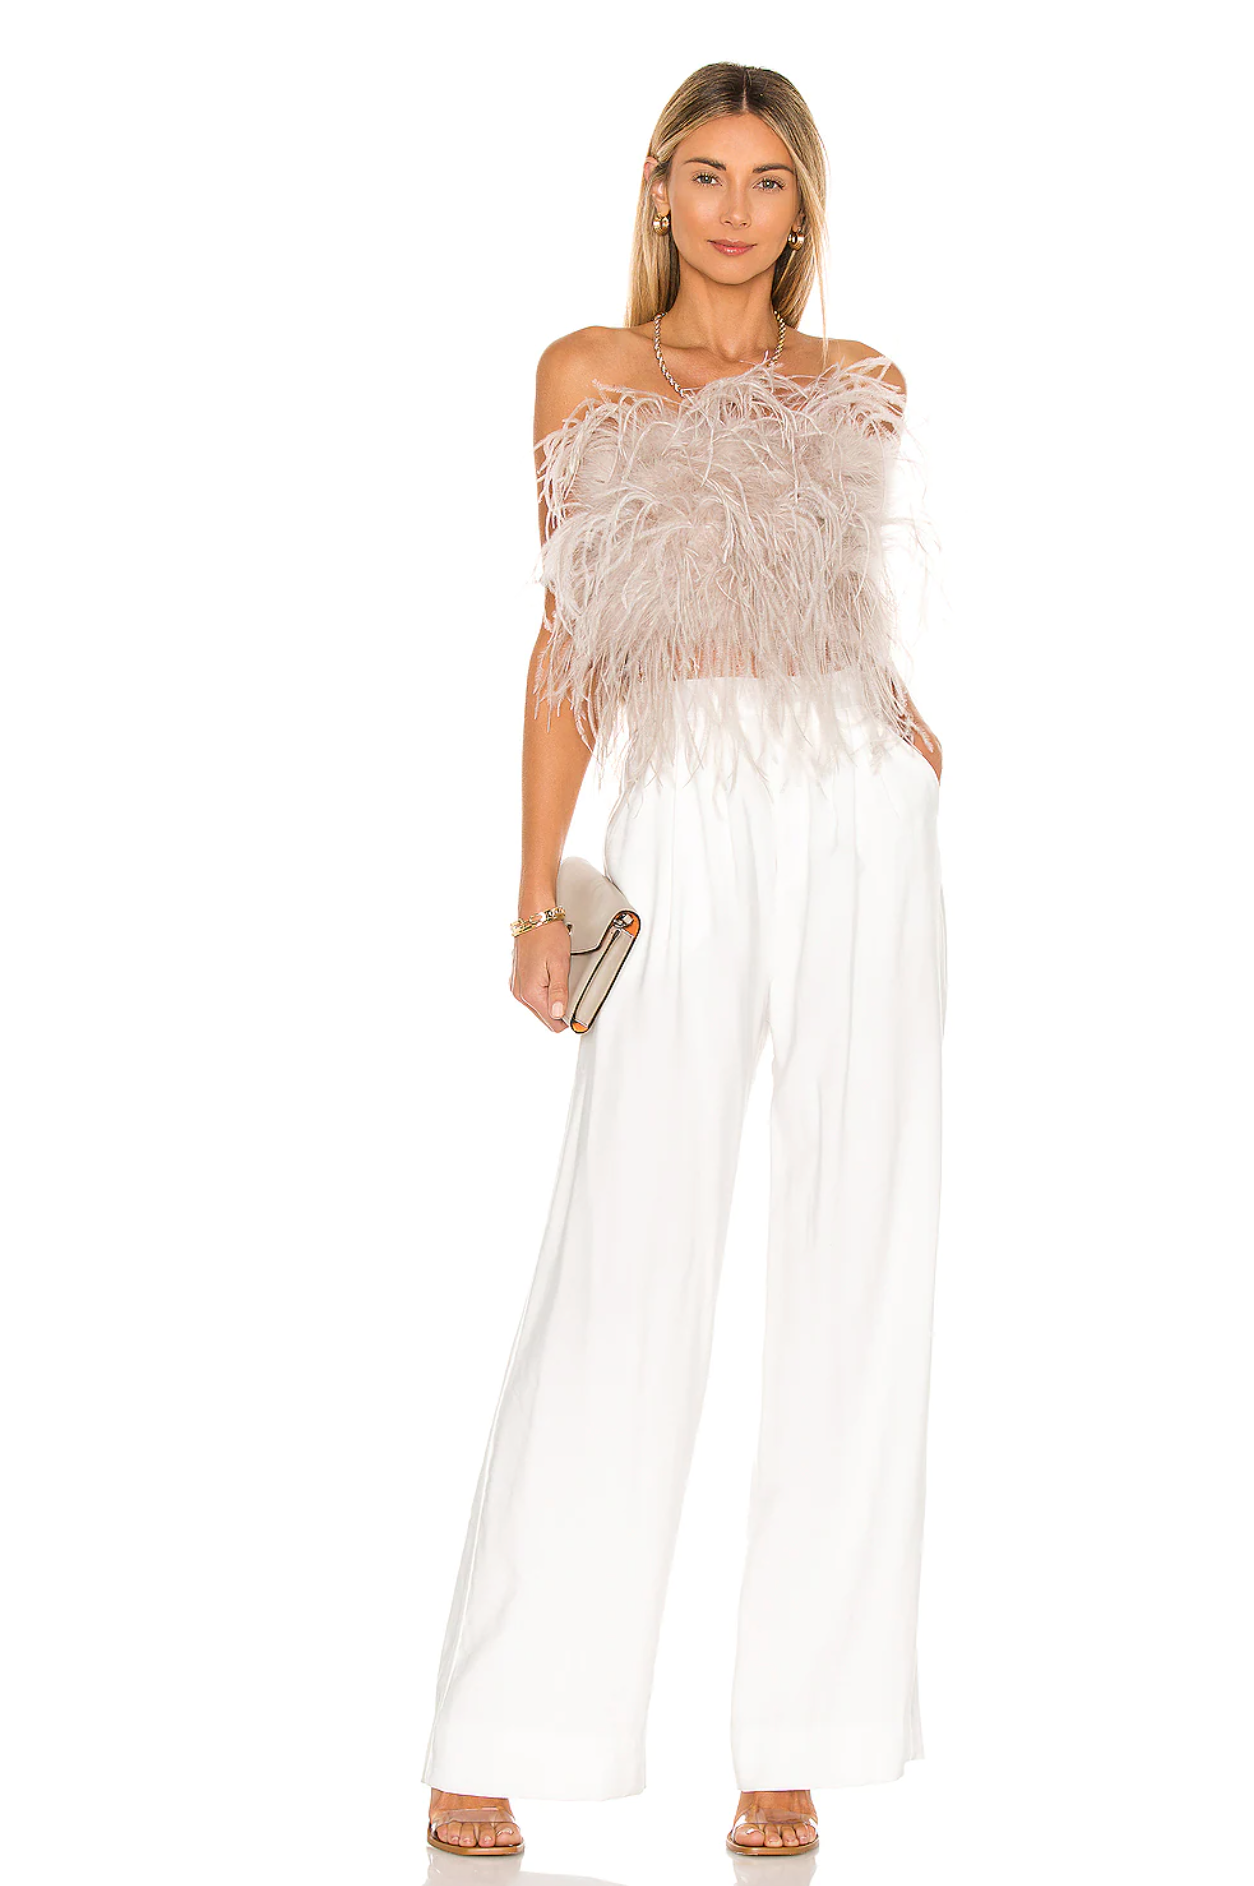 A strapless beige feathery top with white trousers, a great bridal shower look for brides from REVOLVE